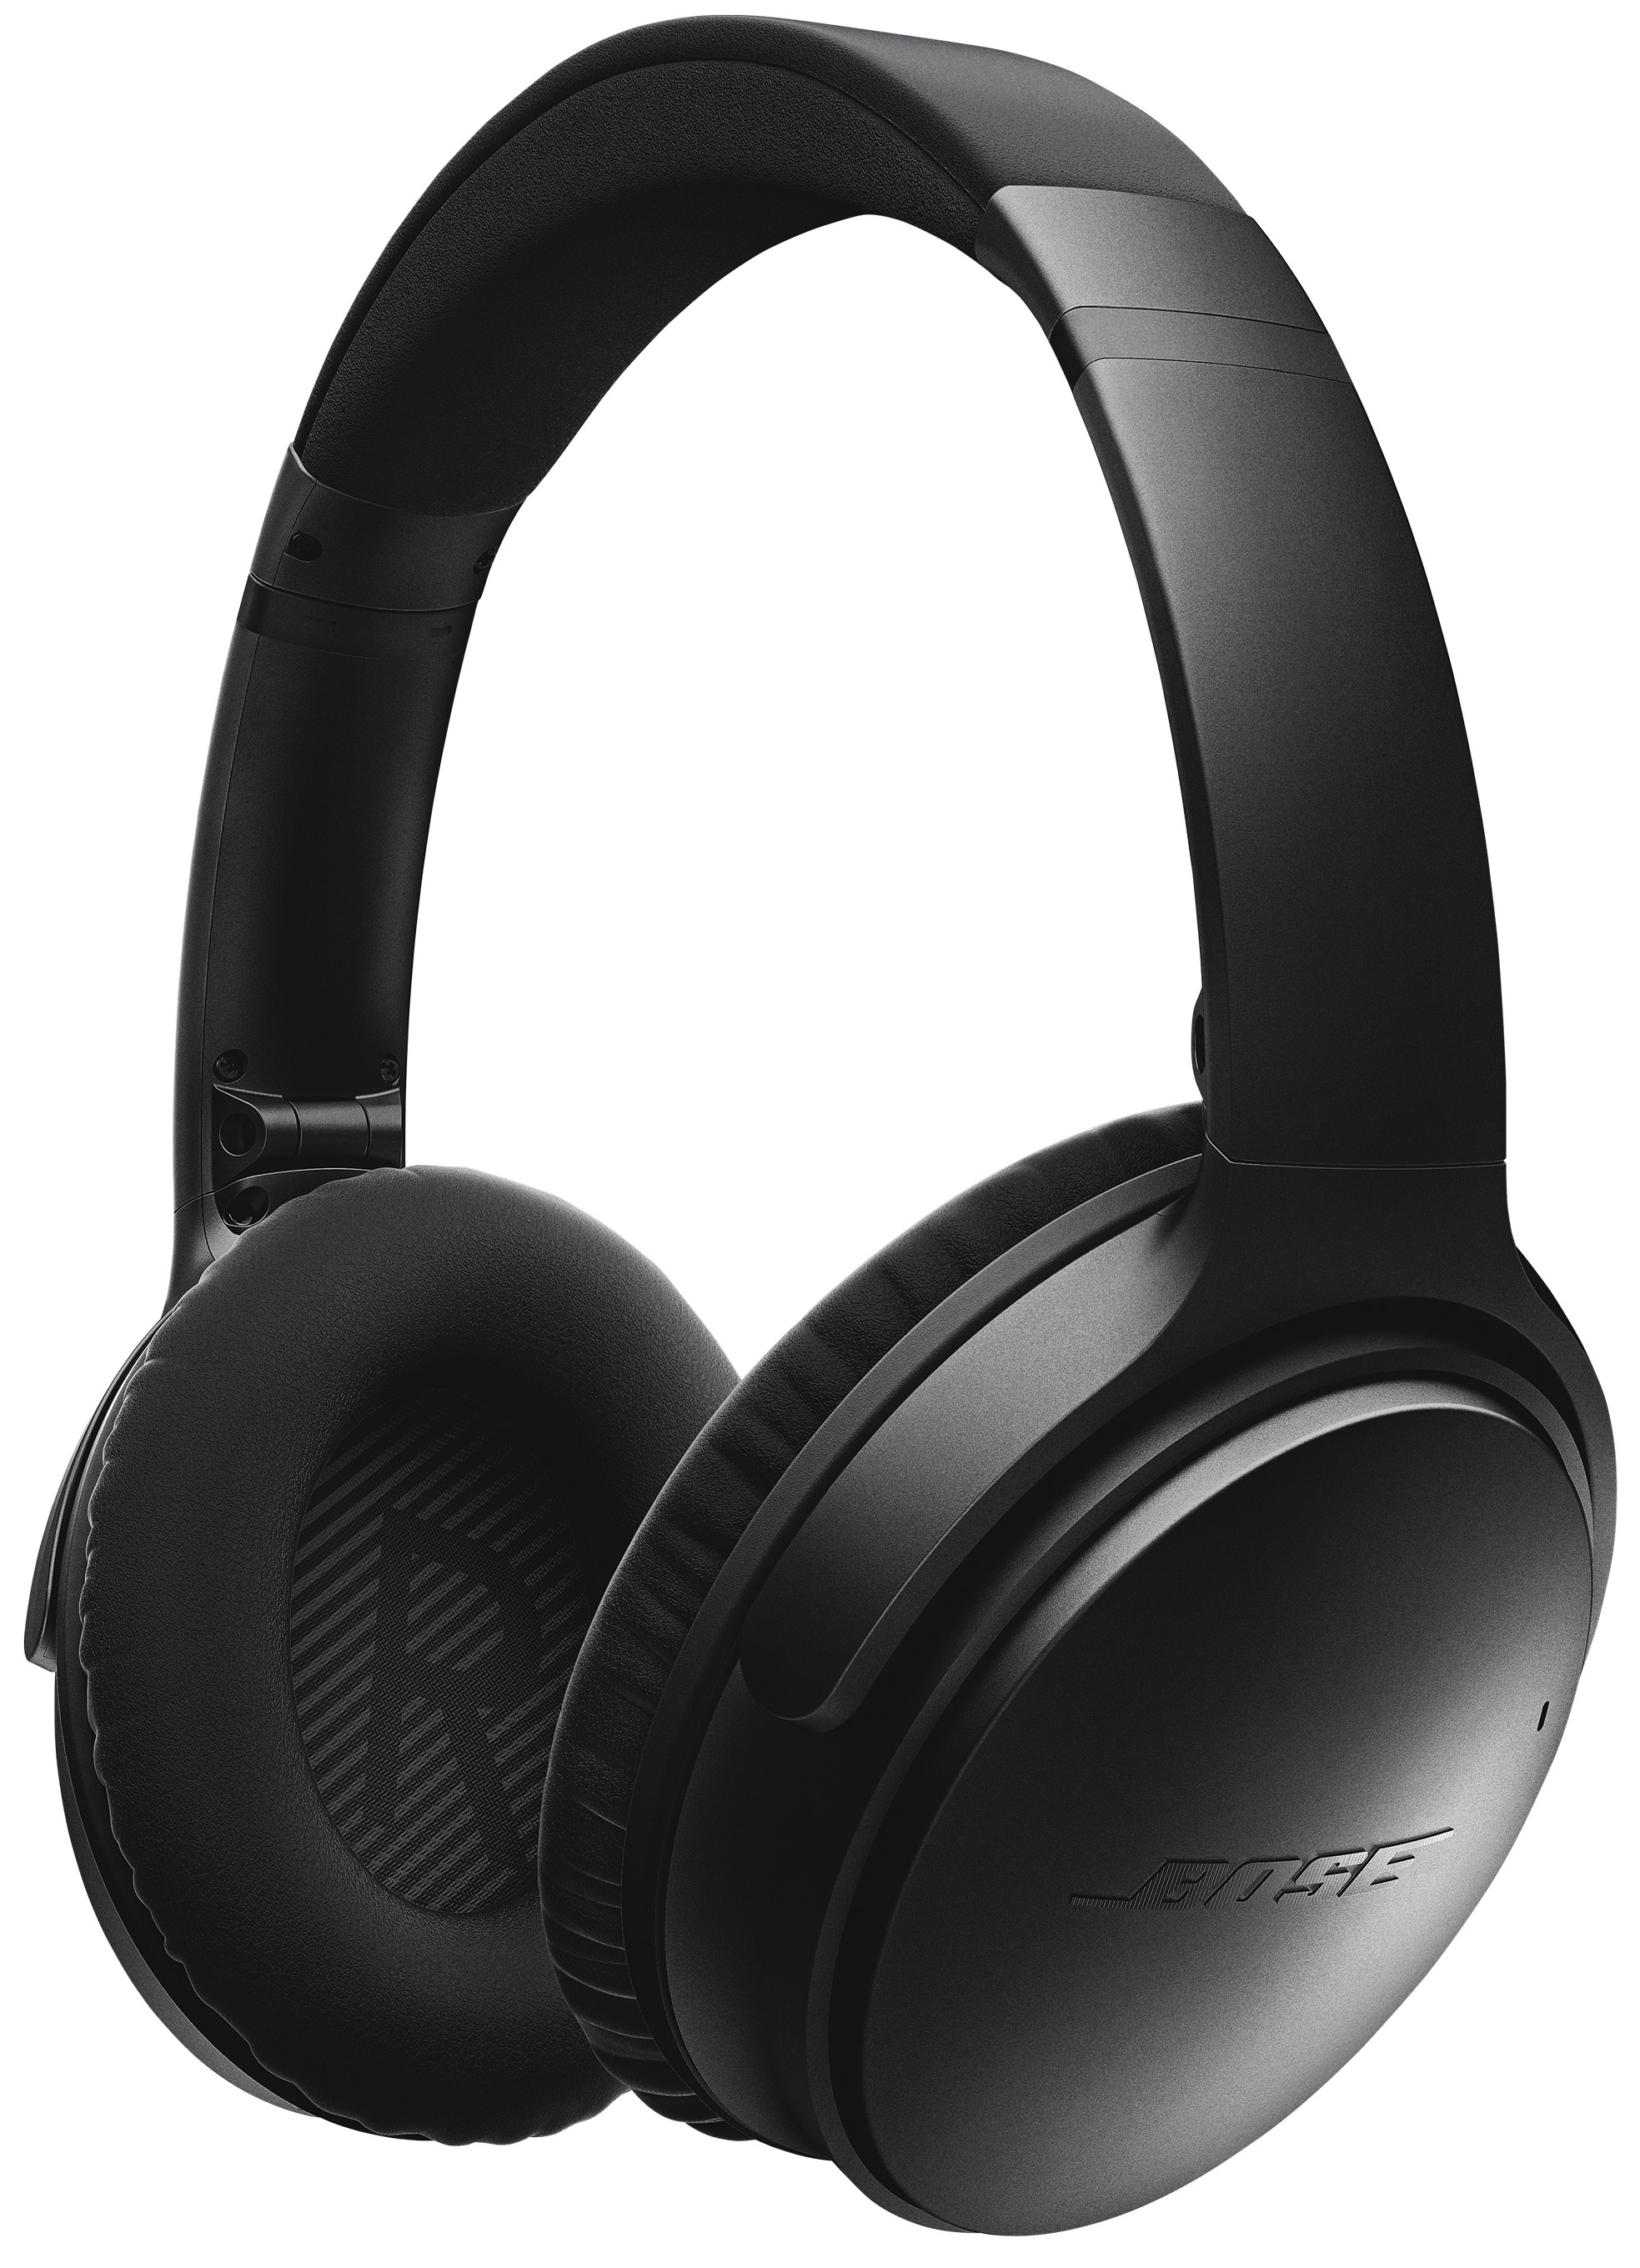 Bose's new wireless headphones come with its premium noise-cancelling tech